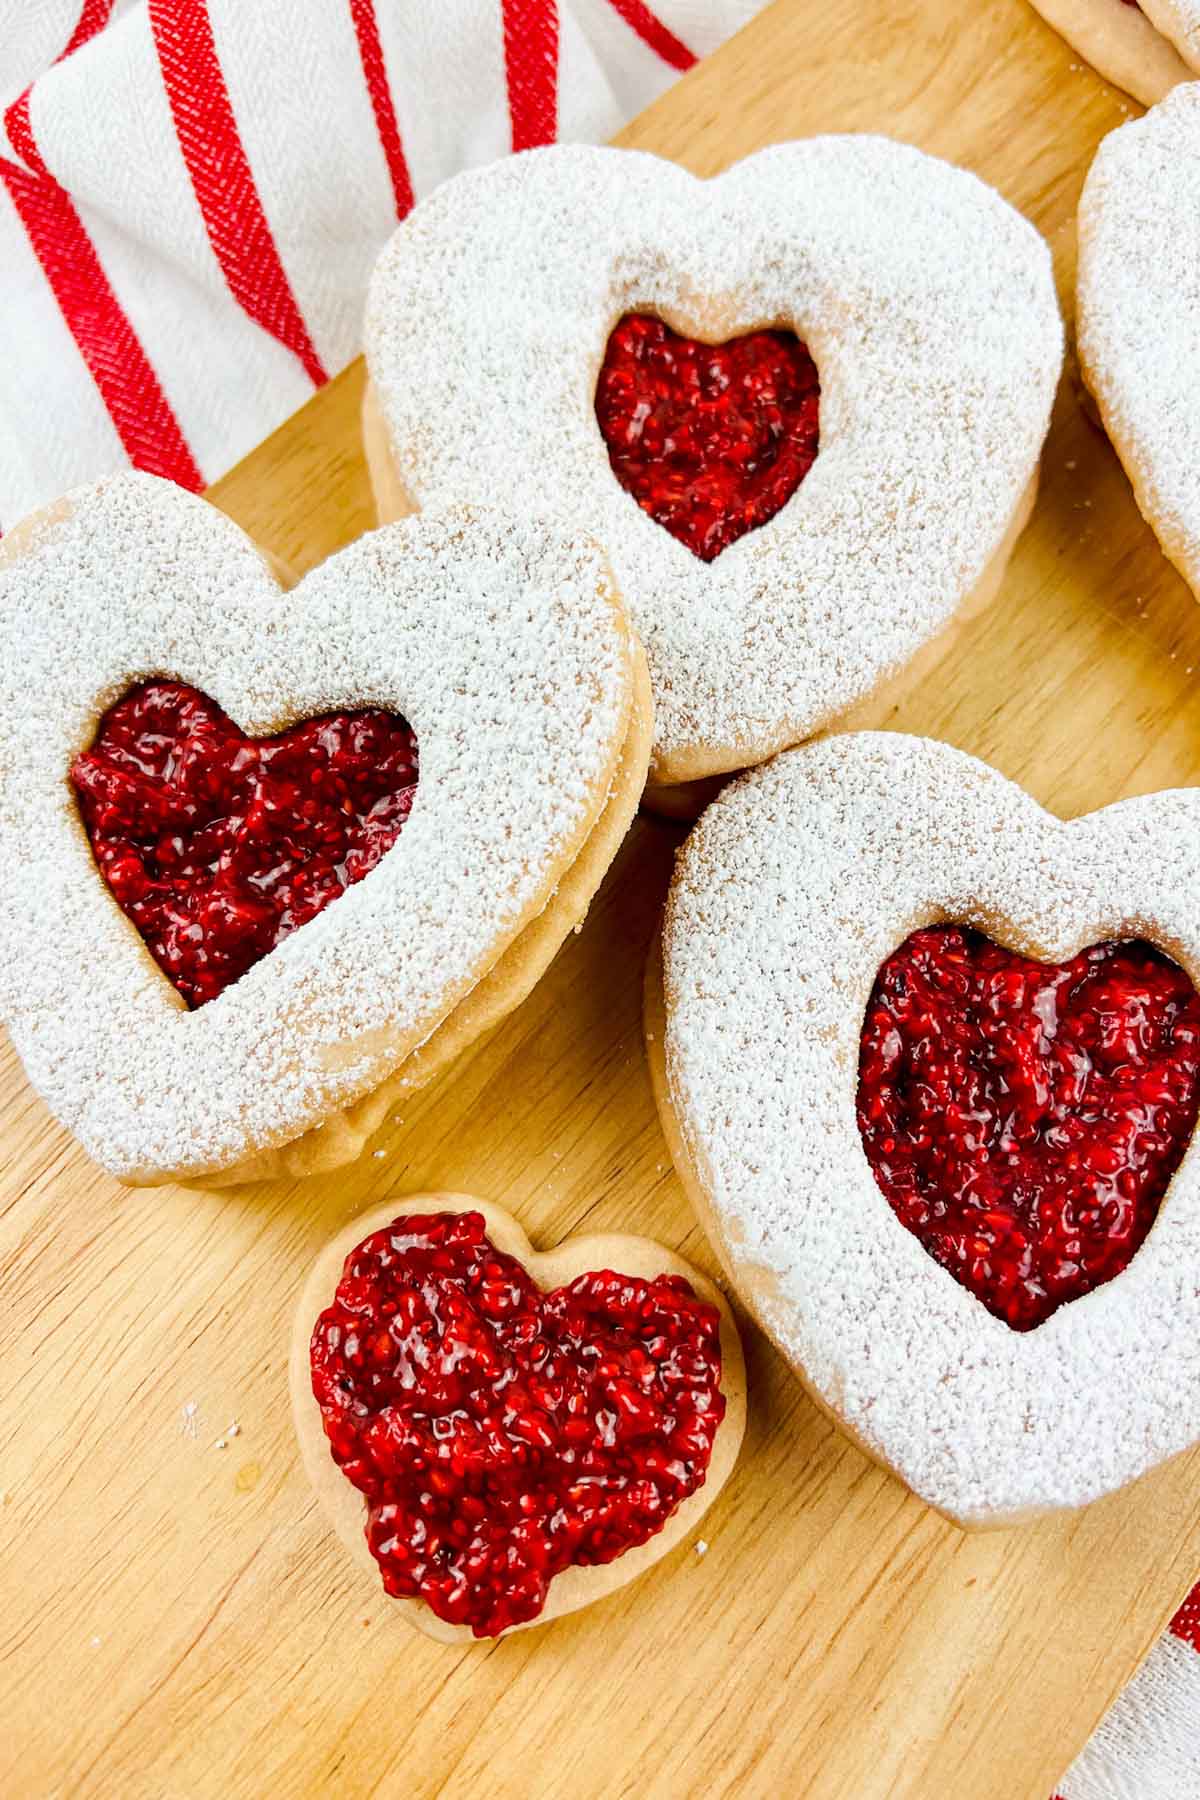 close up view of jam filled heart shaped cookies on a wood board.